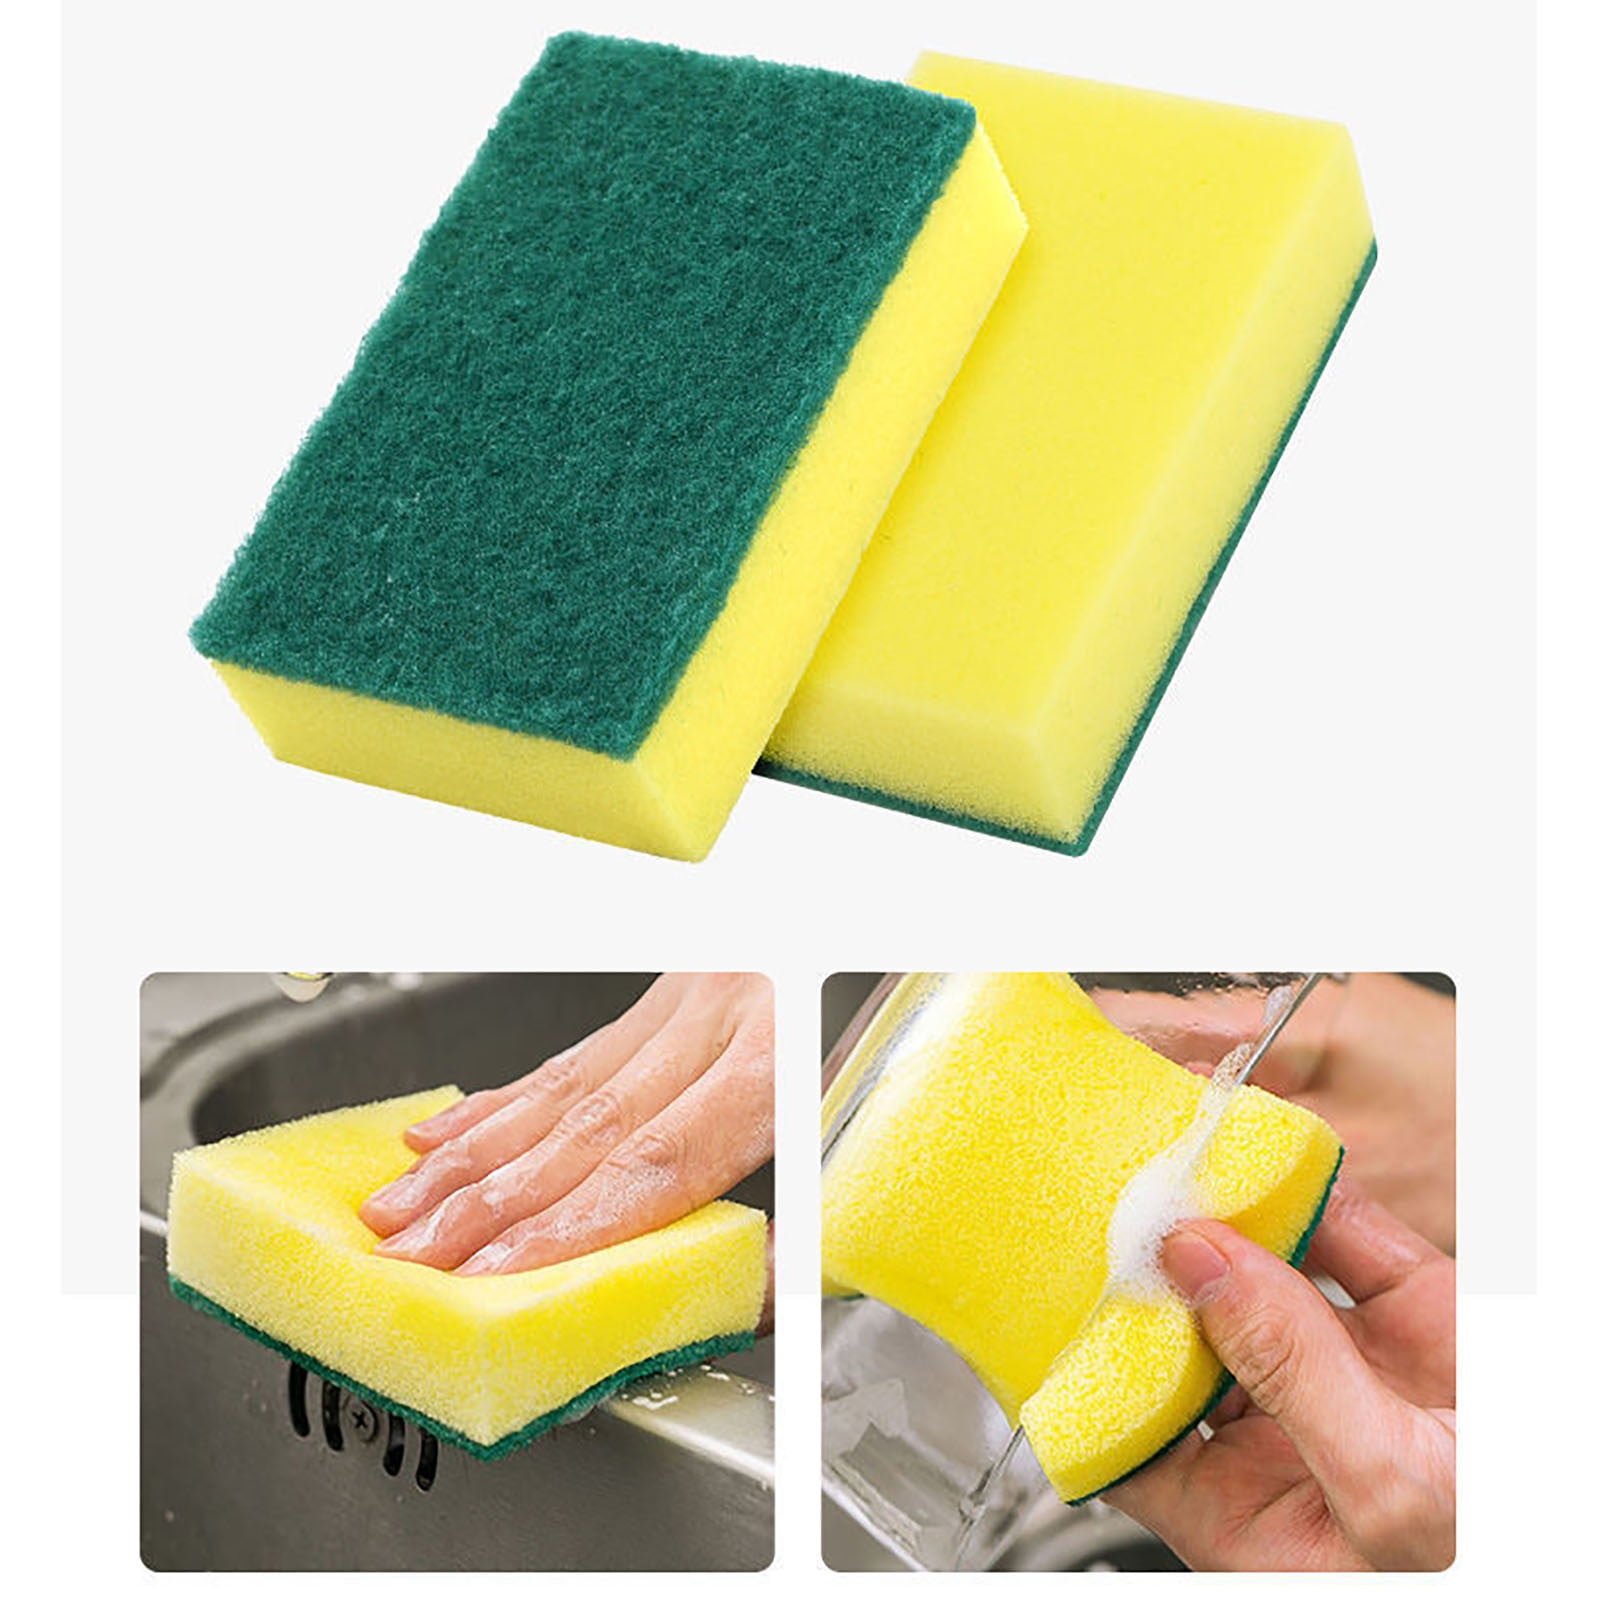 Kitchen Cleaning Sponge,Eco Non-Scratch for Dish,Scrub Sponge (Pack of 50), Size: 50pcs